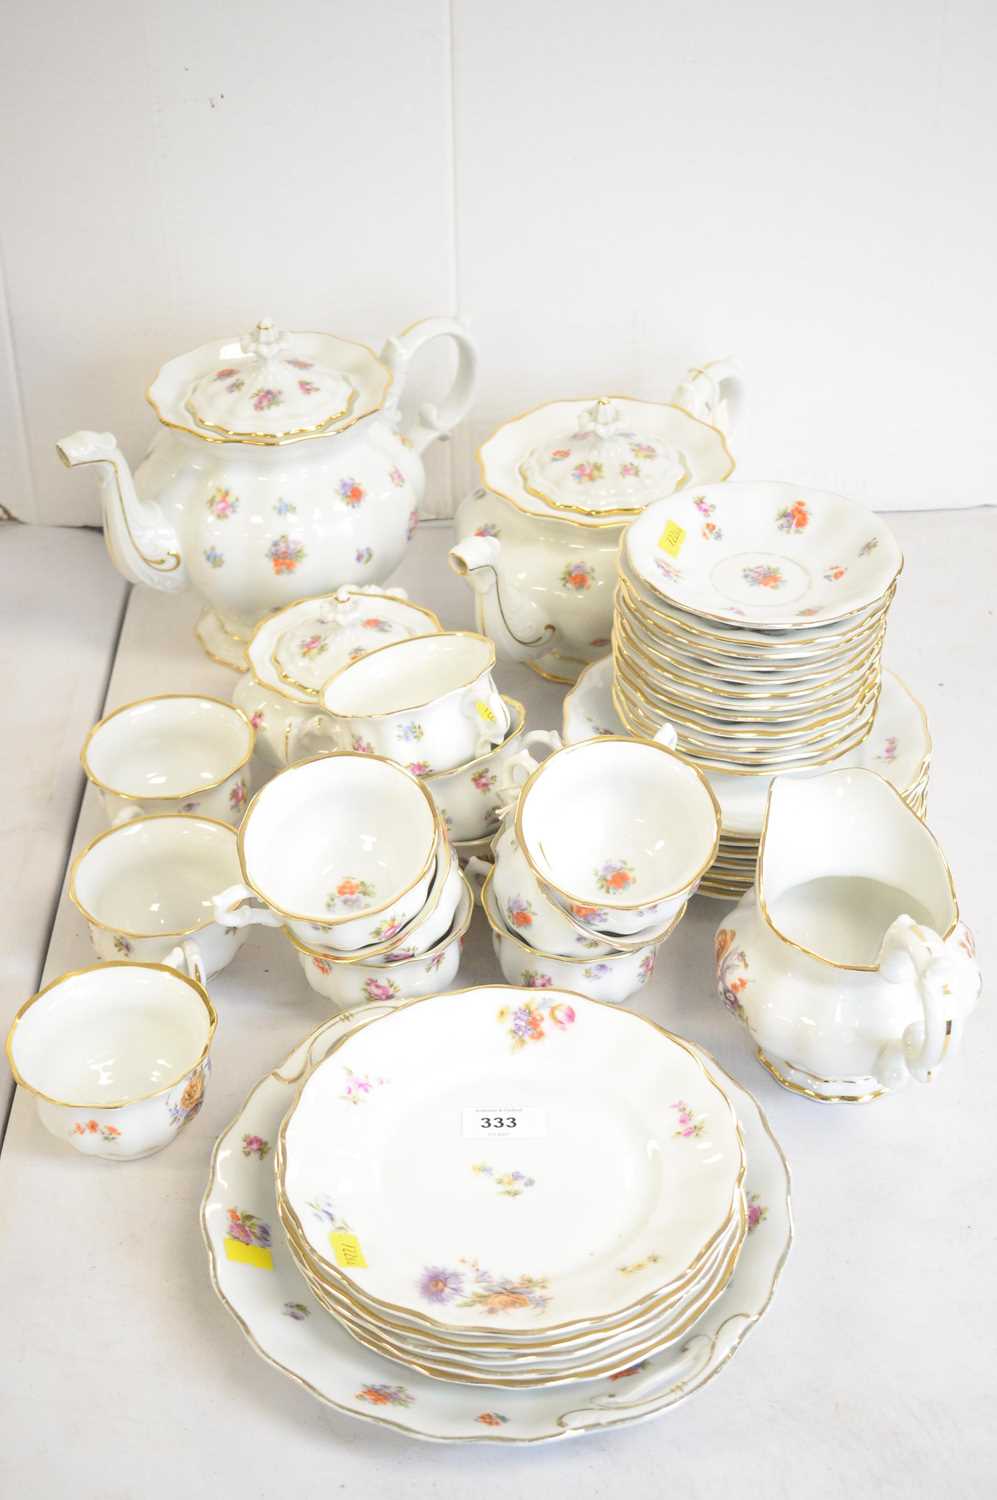 Lot 333 - Early 20th C Continental porcelain tea service.